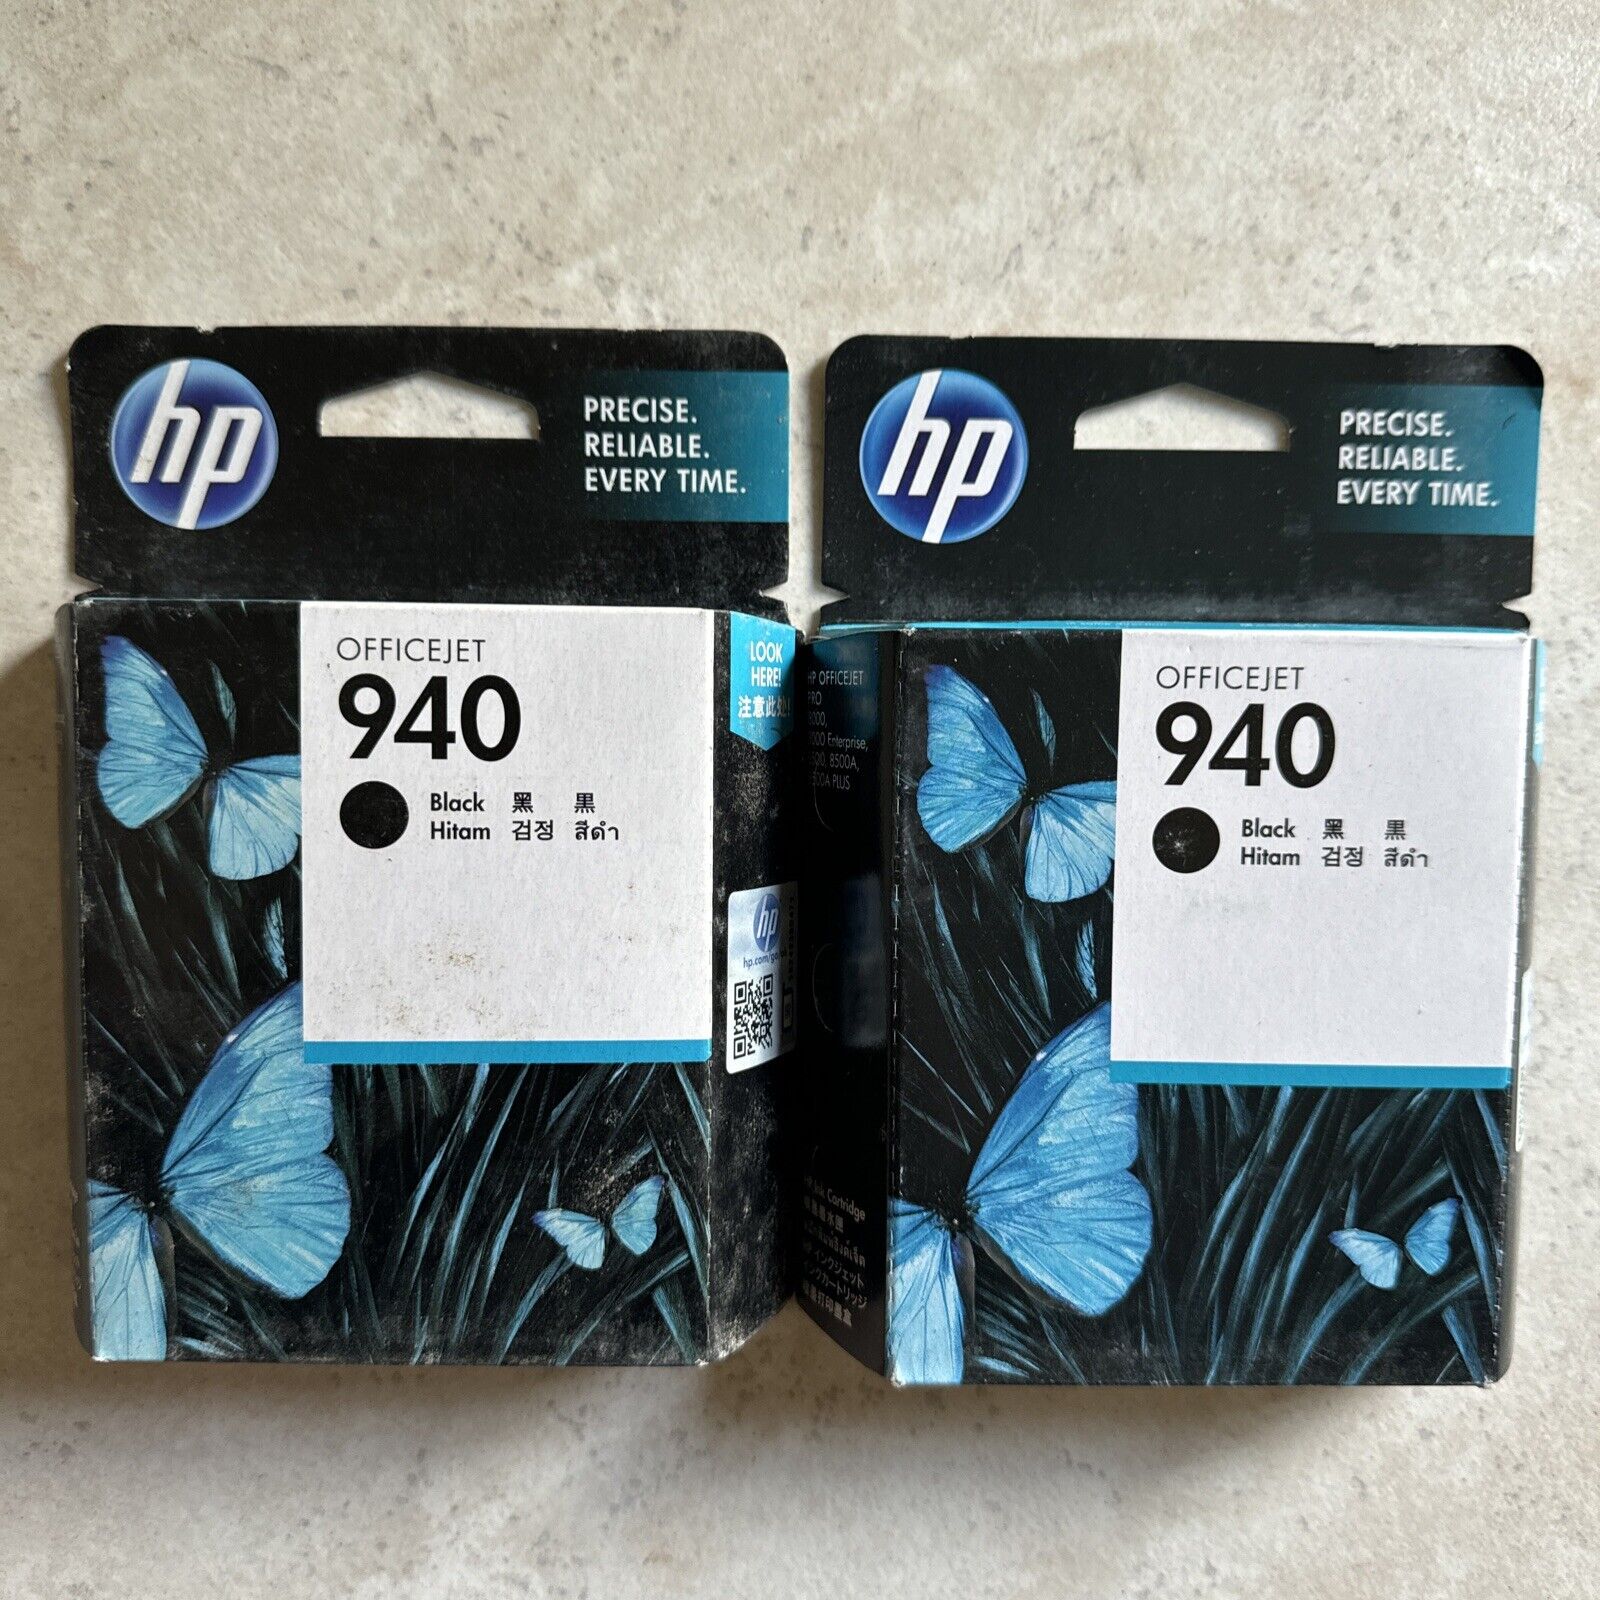 x2 New OEM HP 940 Black Ink 2 two pack lot twin C4902AN Exp16 Genuine Retail BOX